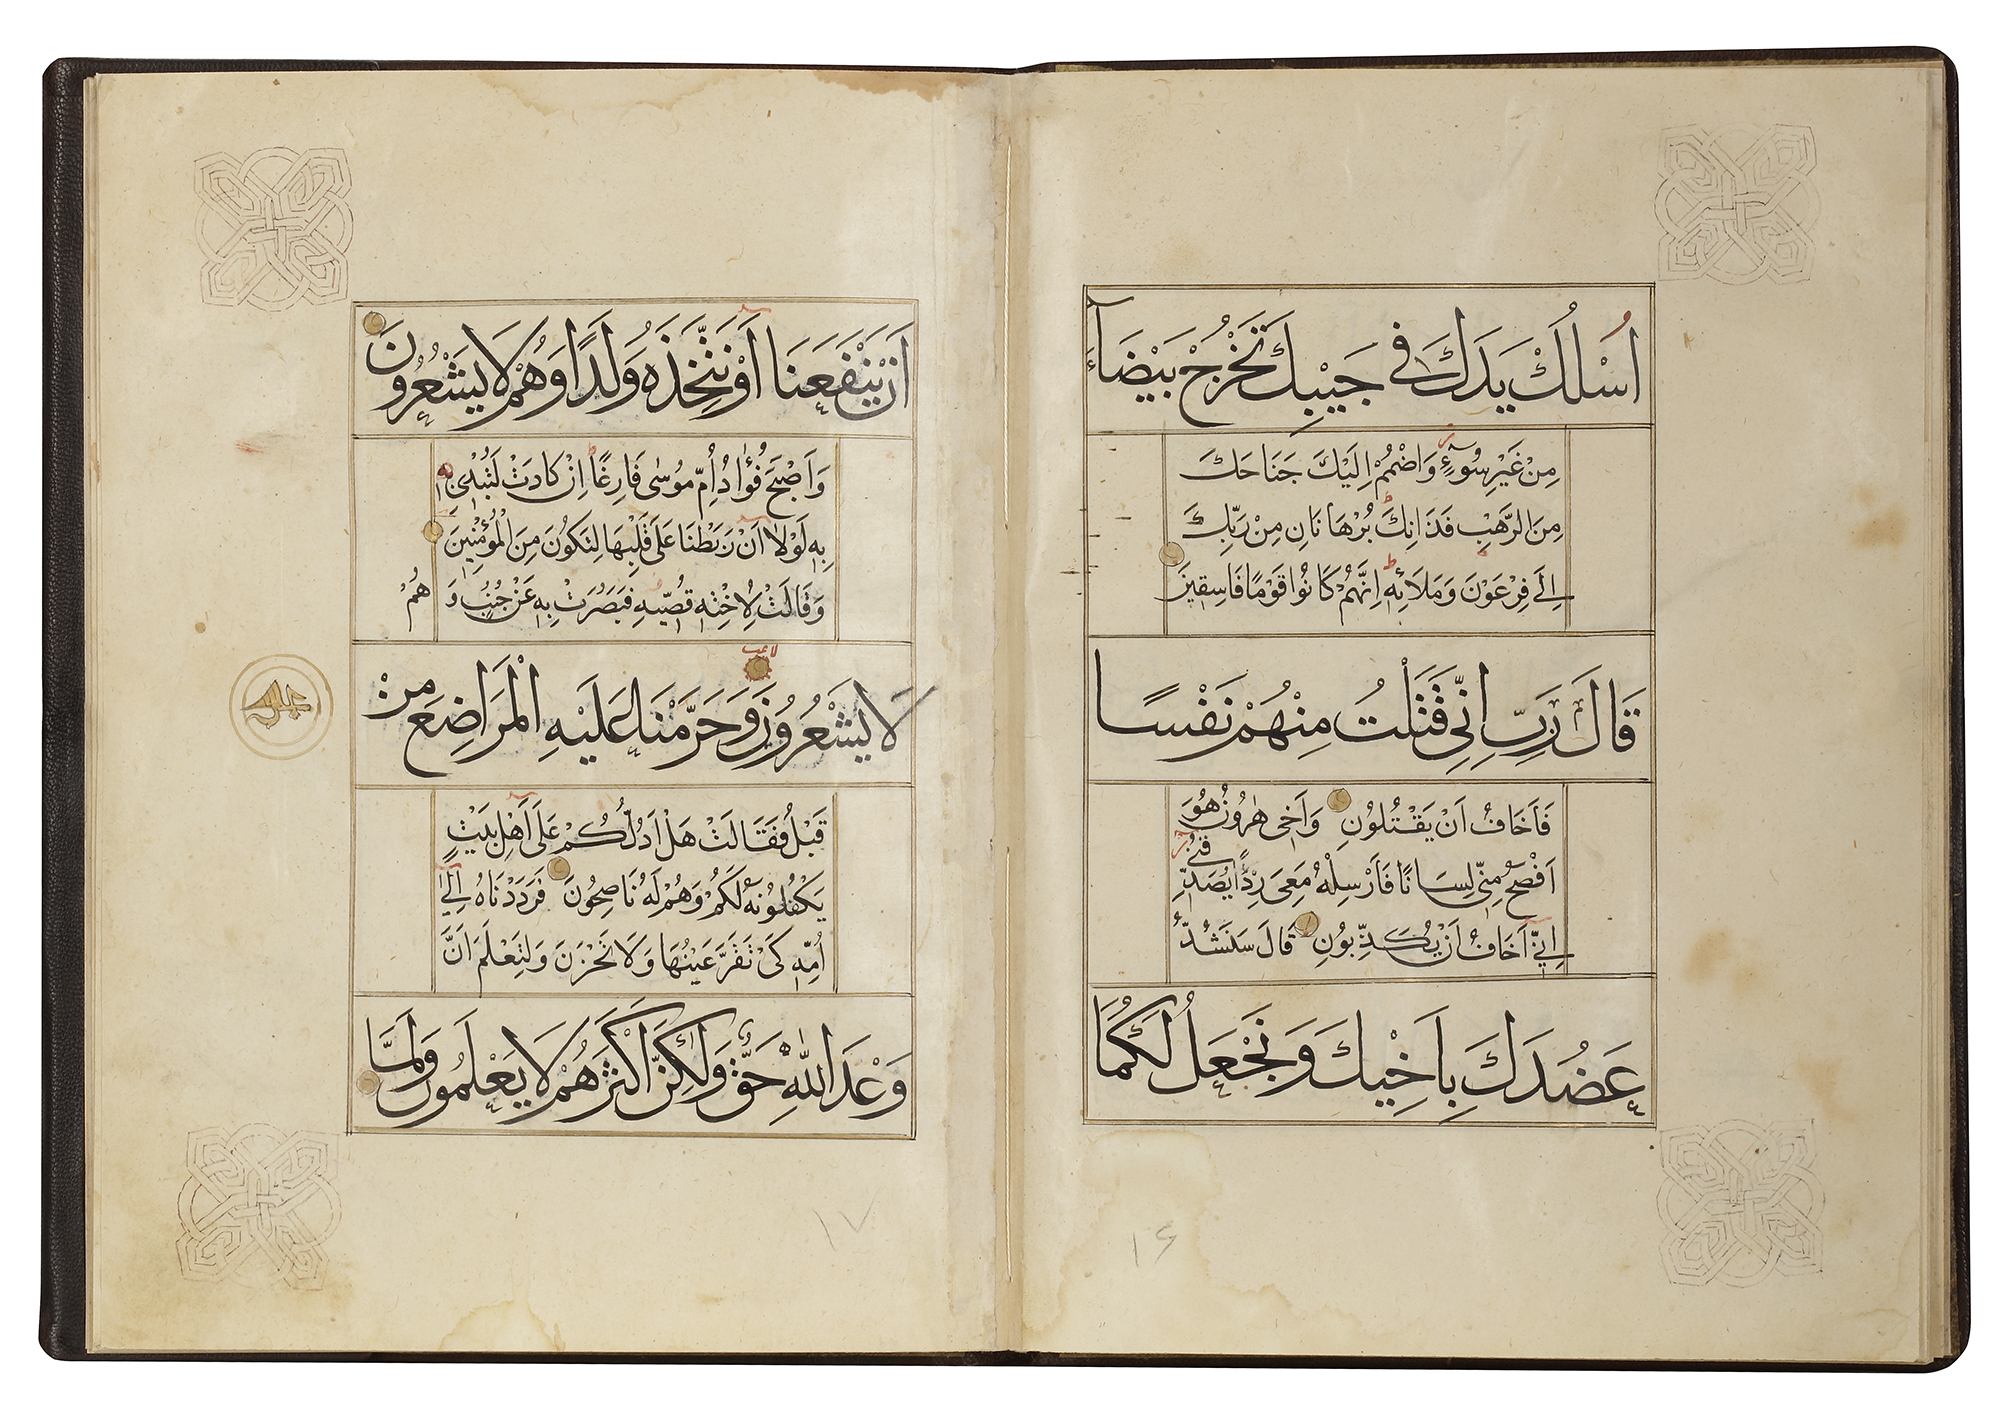 A LATE TIMURID QURAN JUZ, BY AHMED AL-RUMI IN 858 AH/1454 AD - Image 6 of 12